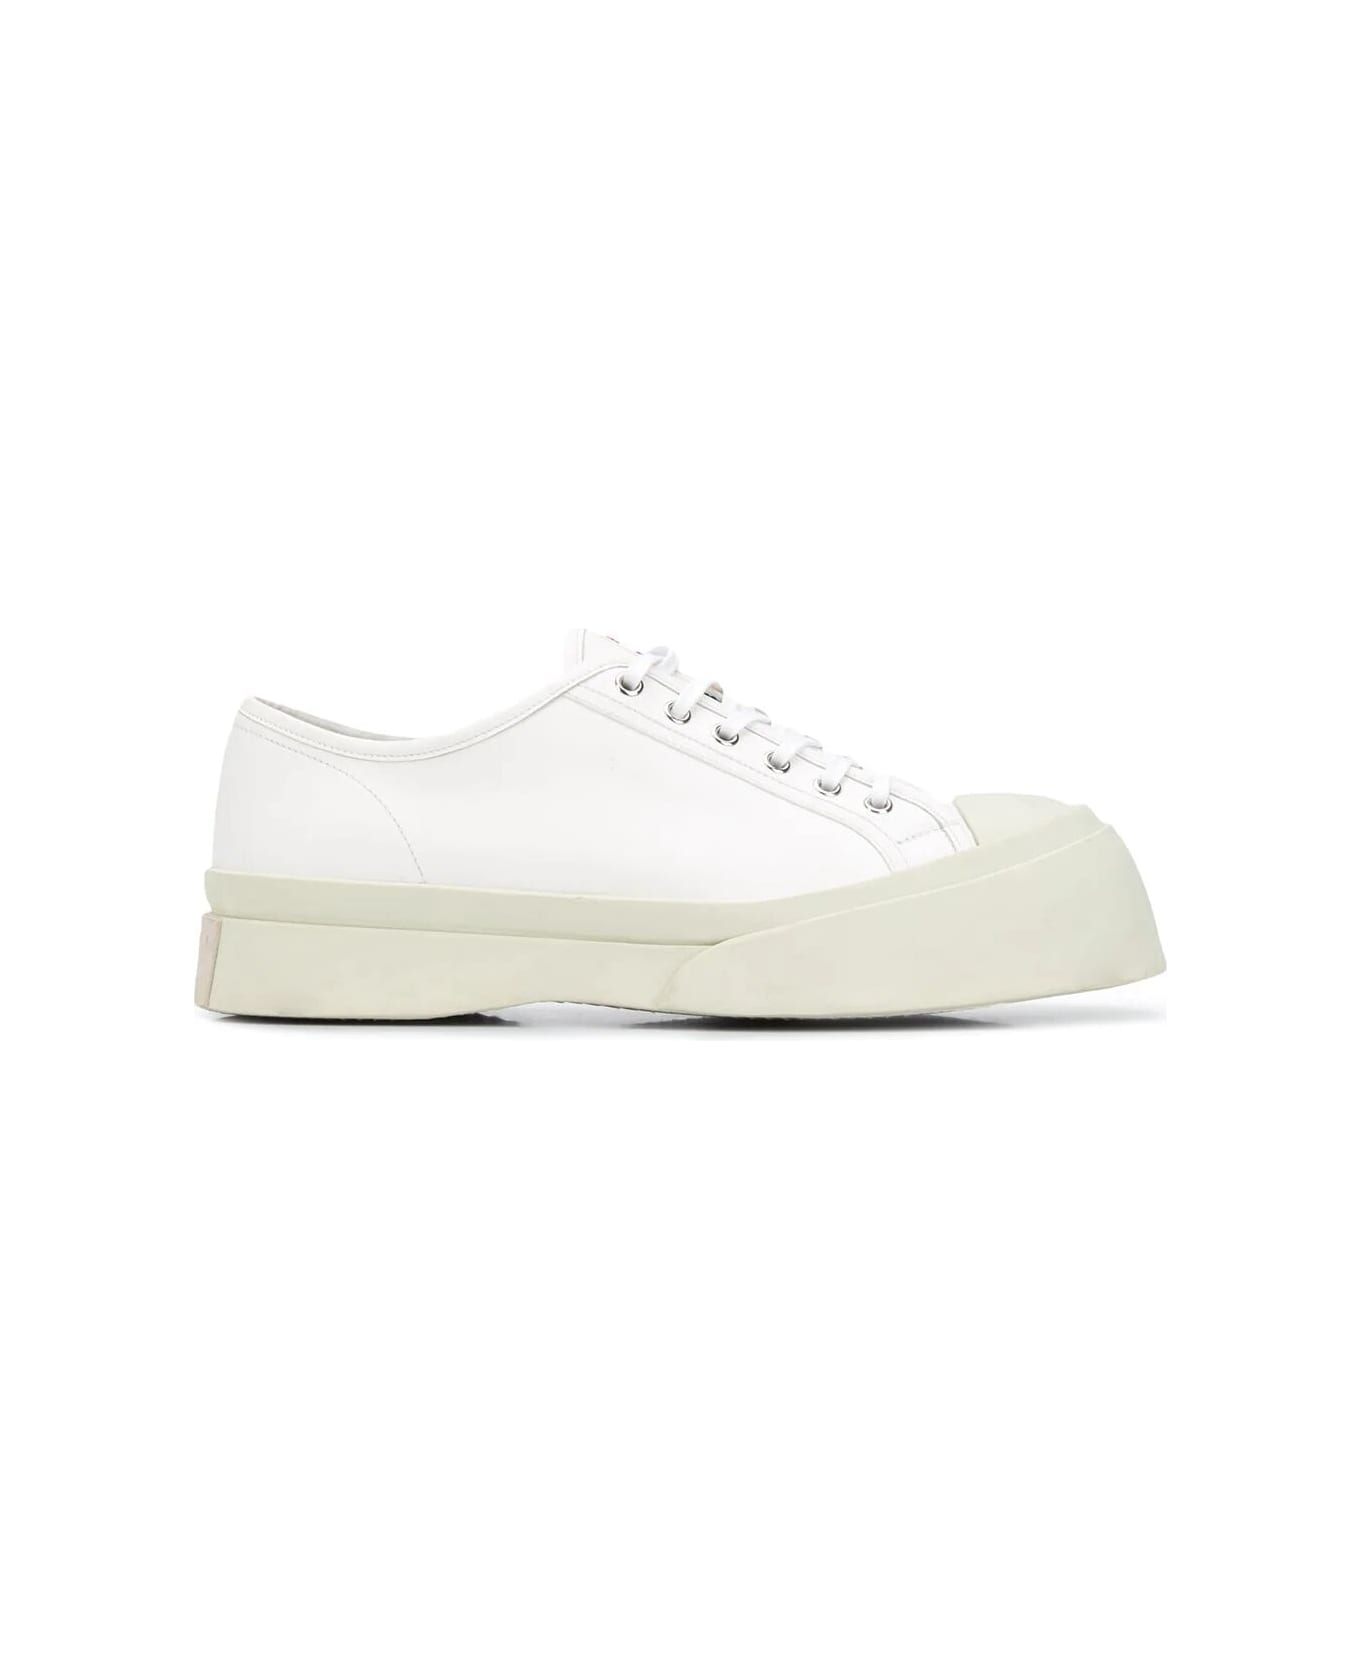 Marni Lace Up Sneakers - Lily White スニーカー